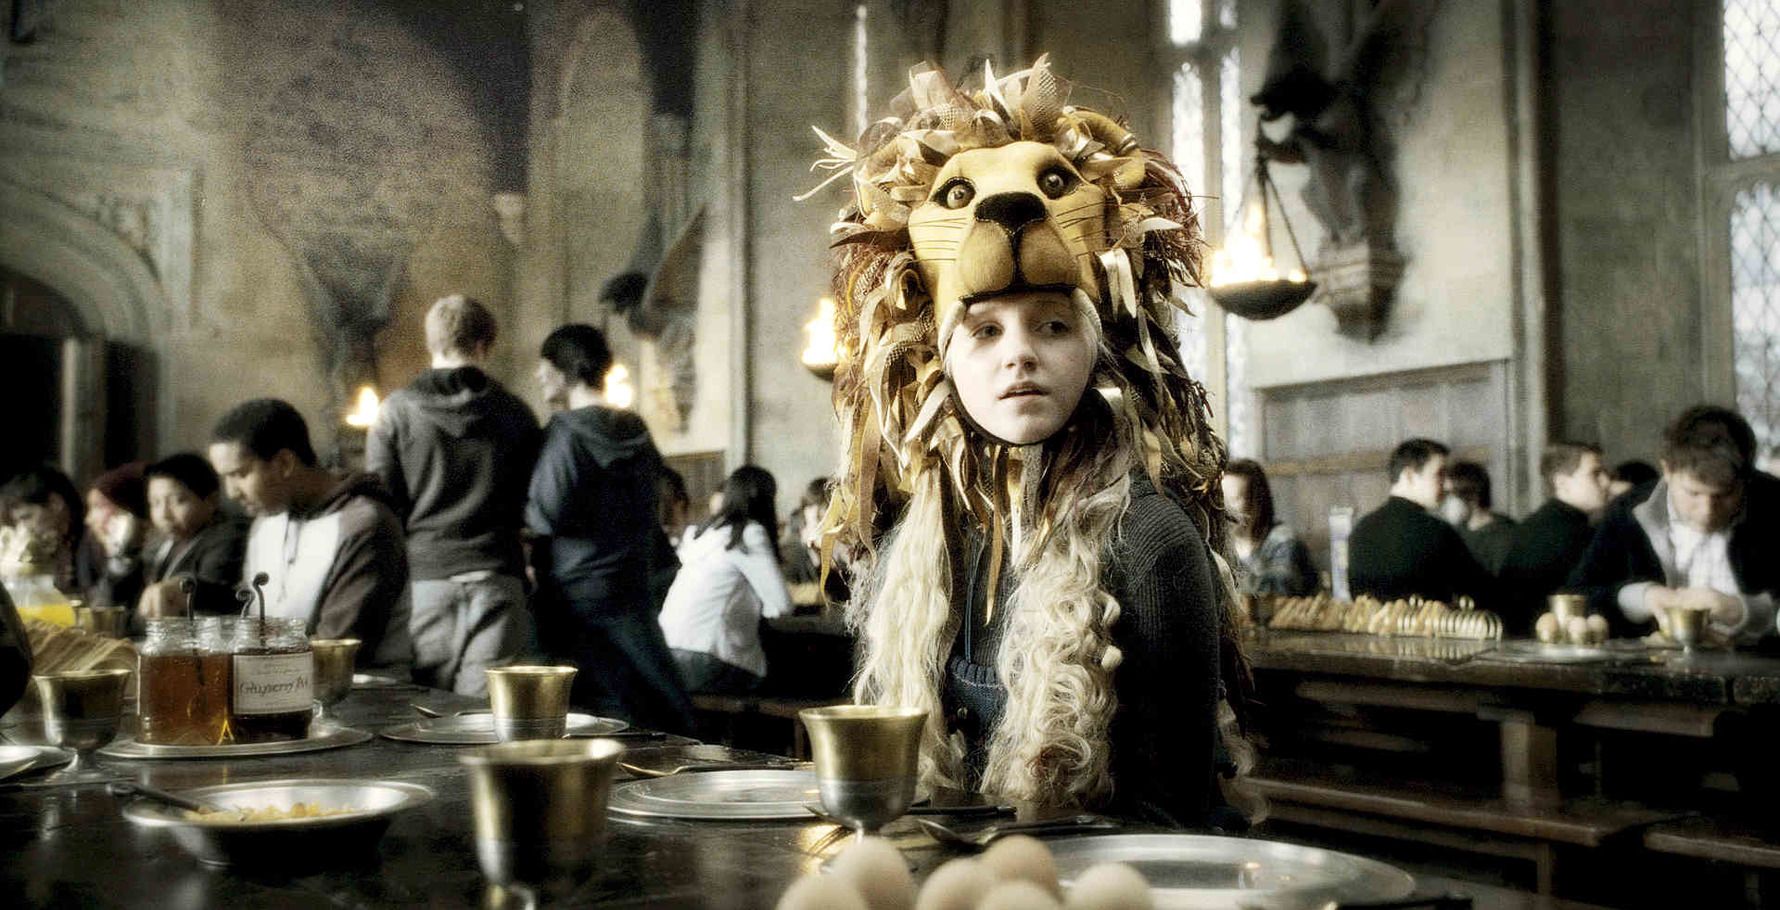 Ranked Every Hogwarts House Based On How Much Trouble They Caused